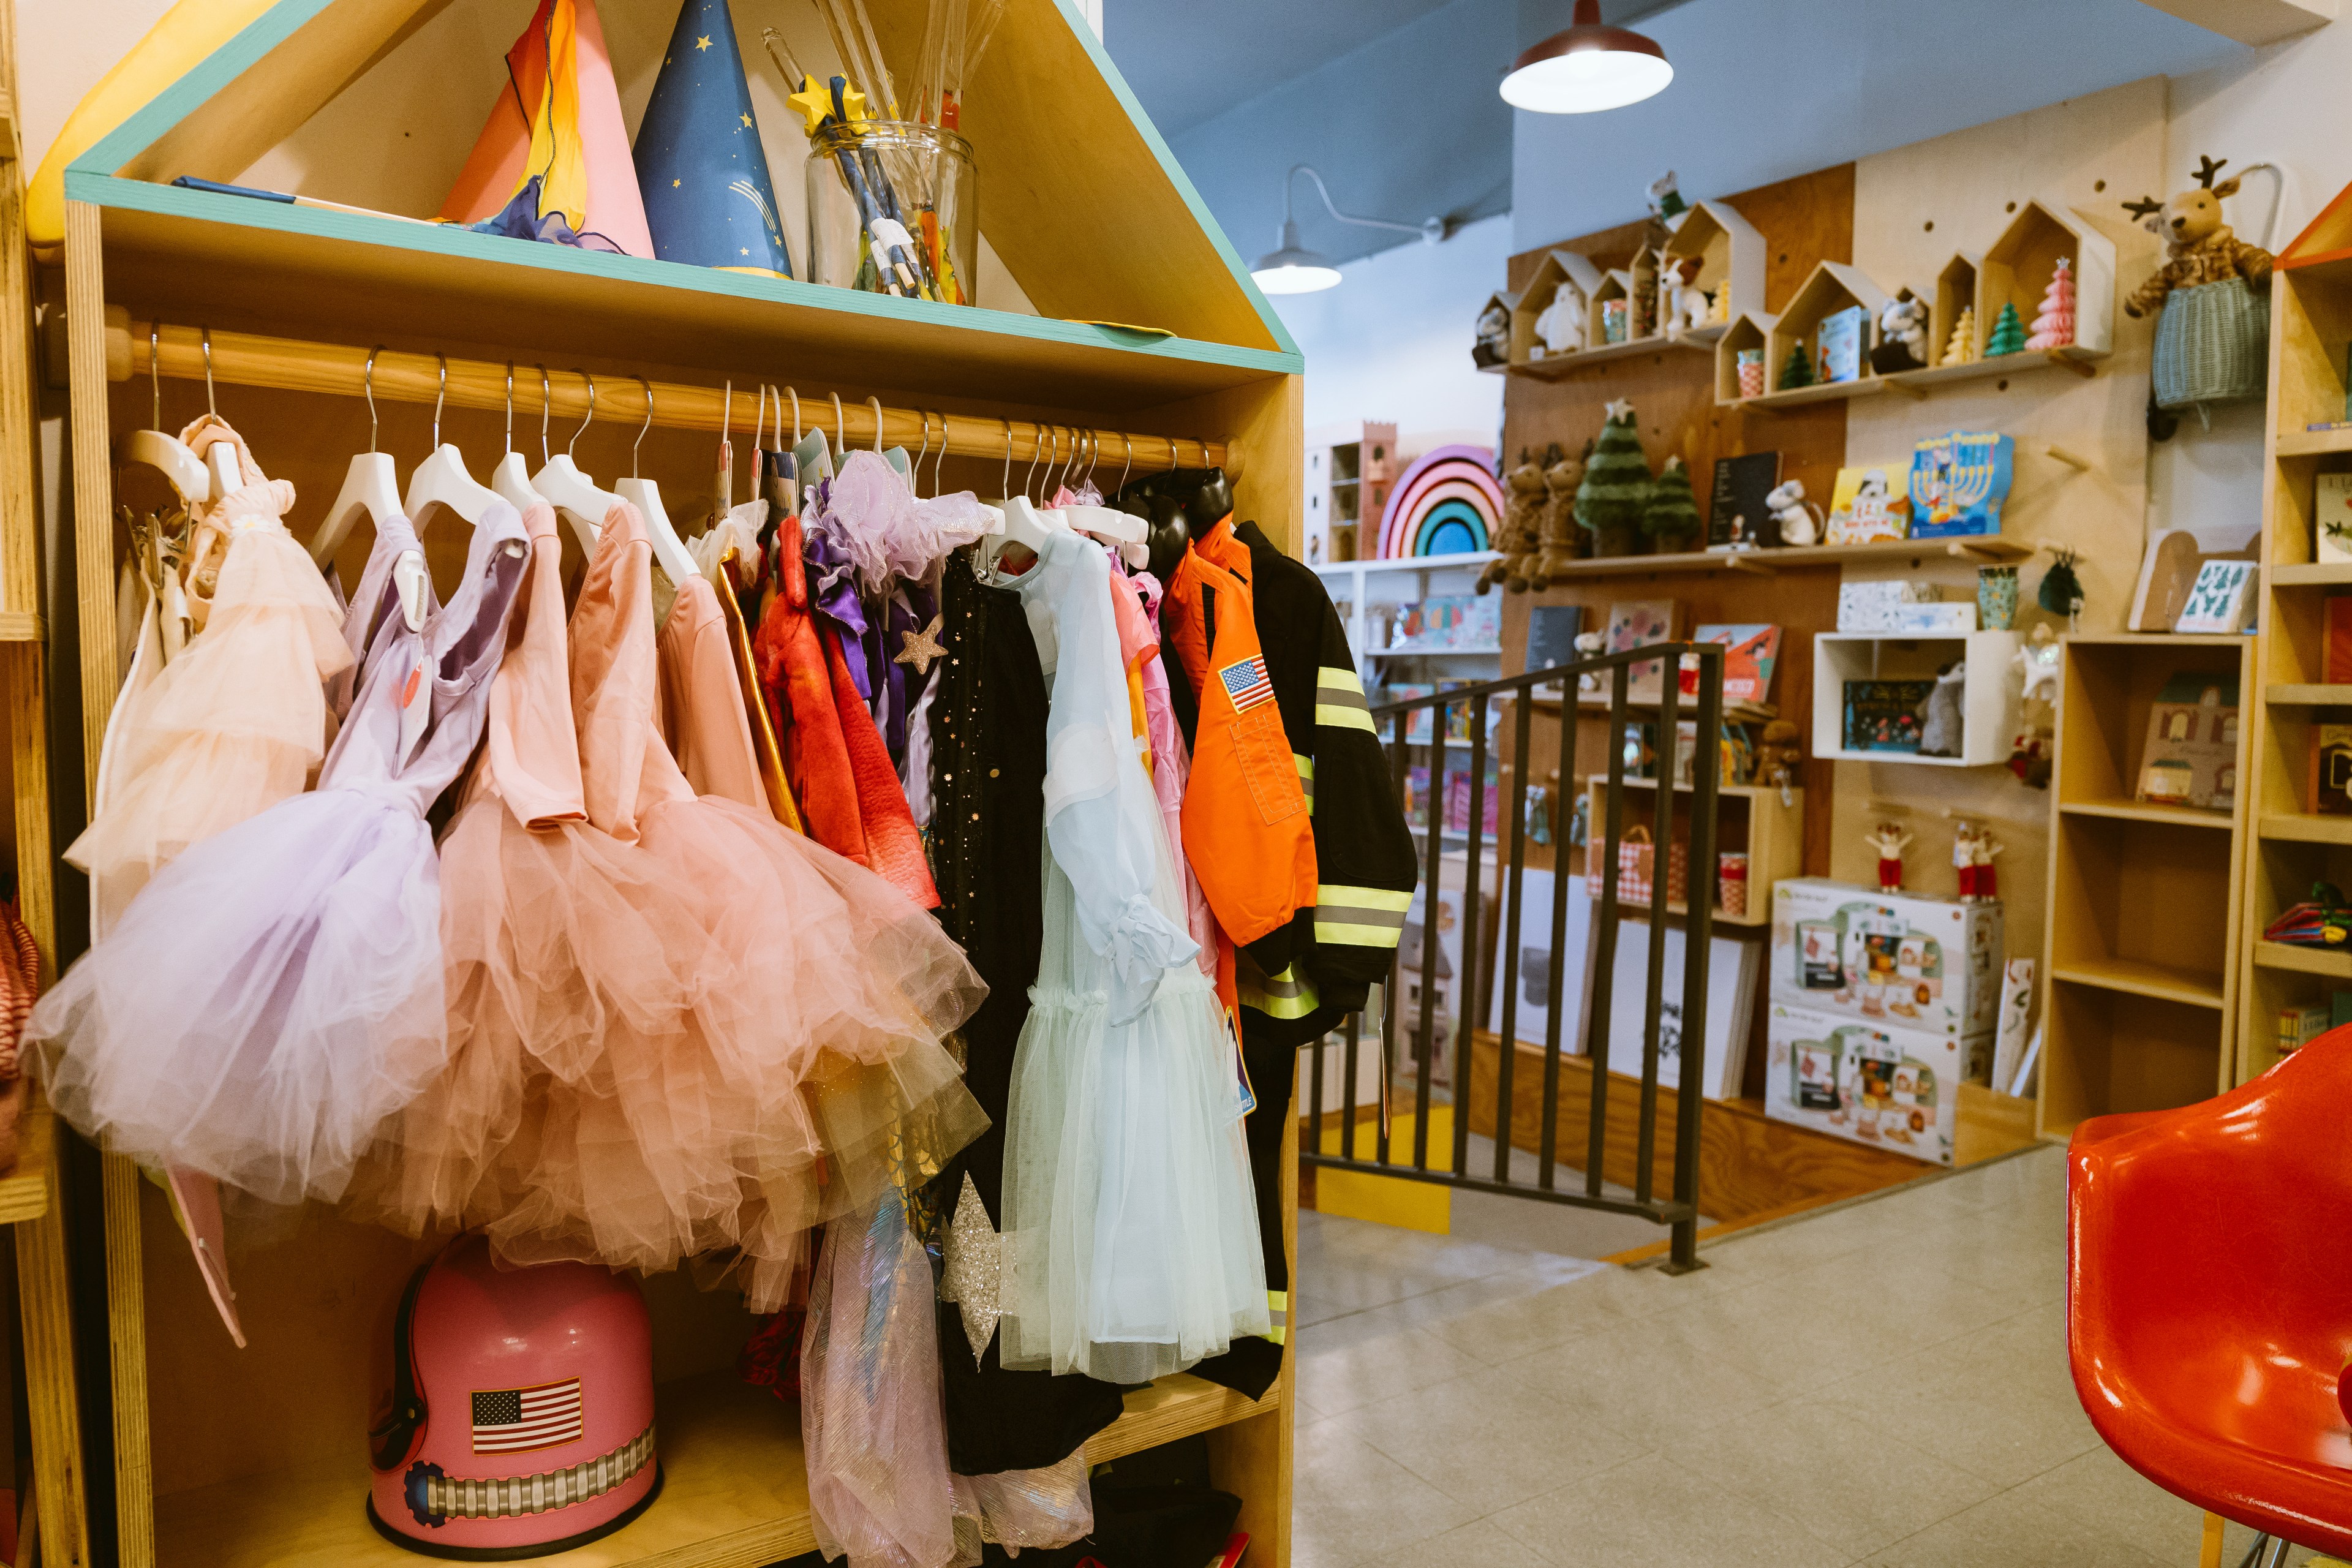 A rack of children's clothing including dresses and tutus with a display of toys in the background.